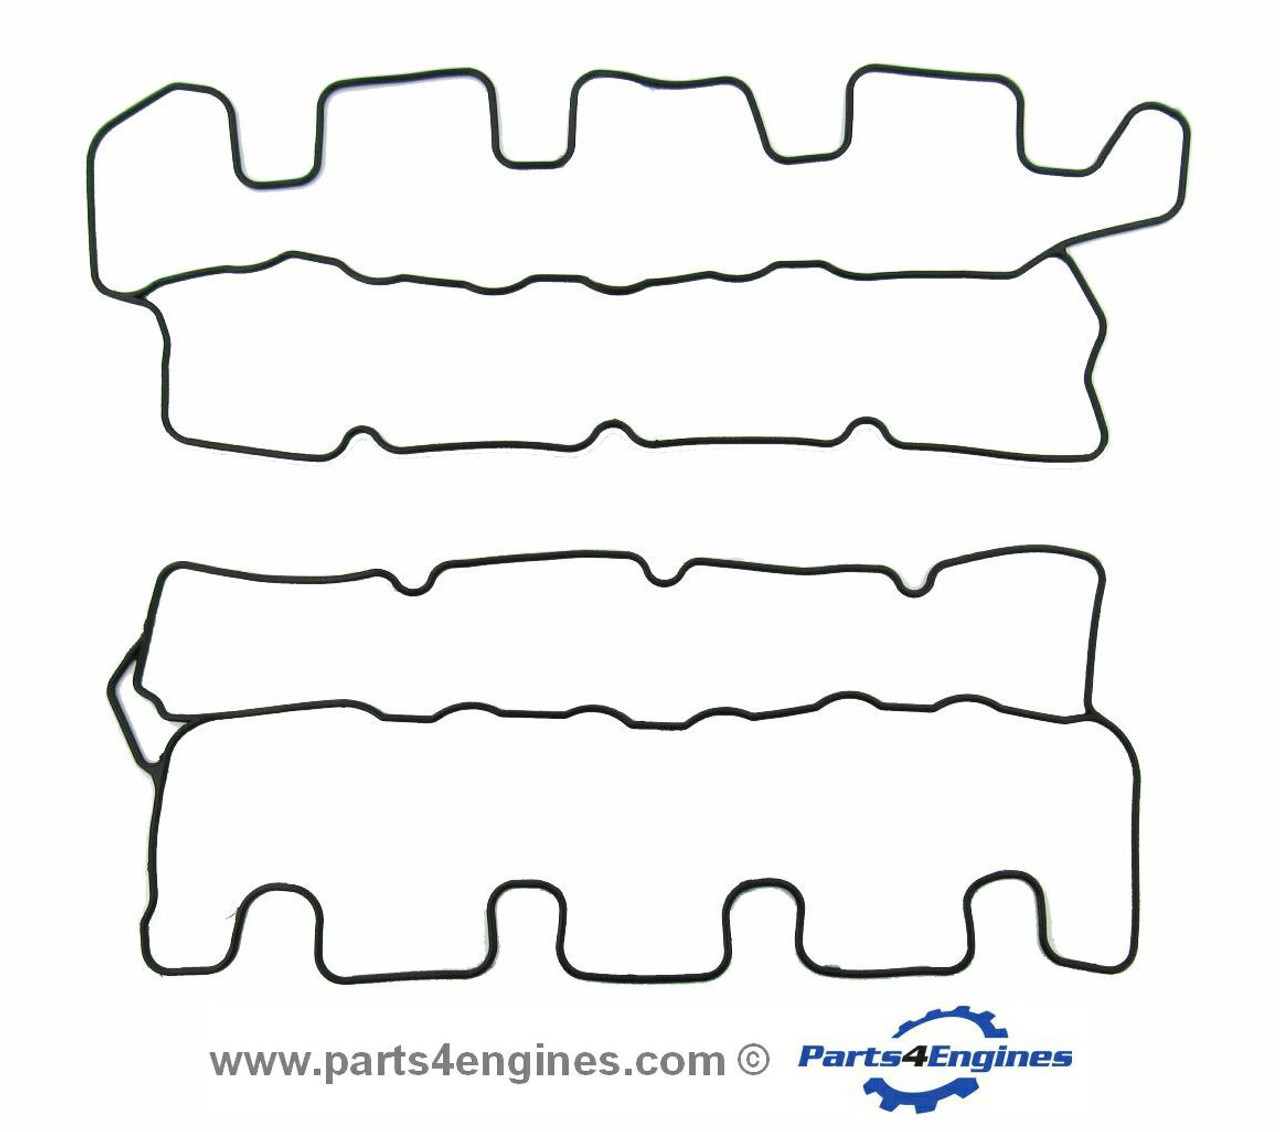 Volvo Penta D2-75 Rocker box cover seal set, from parts4engines.com